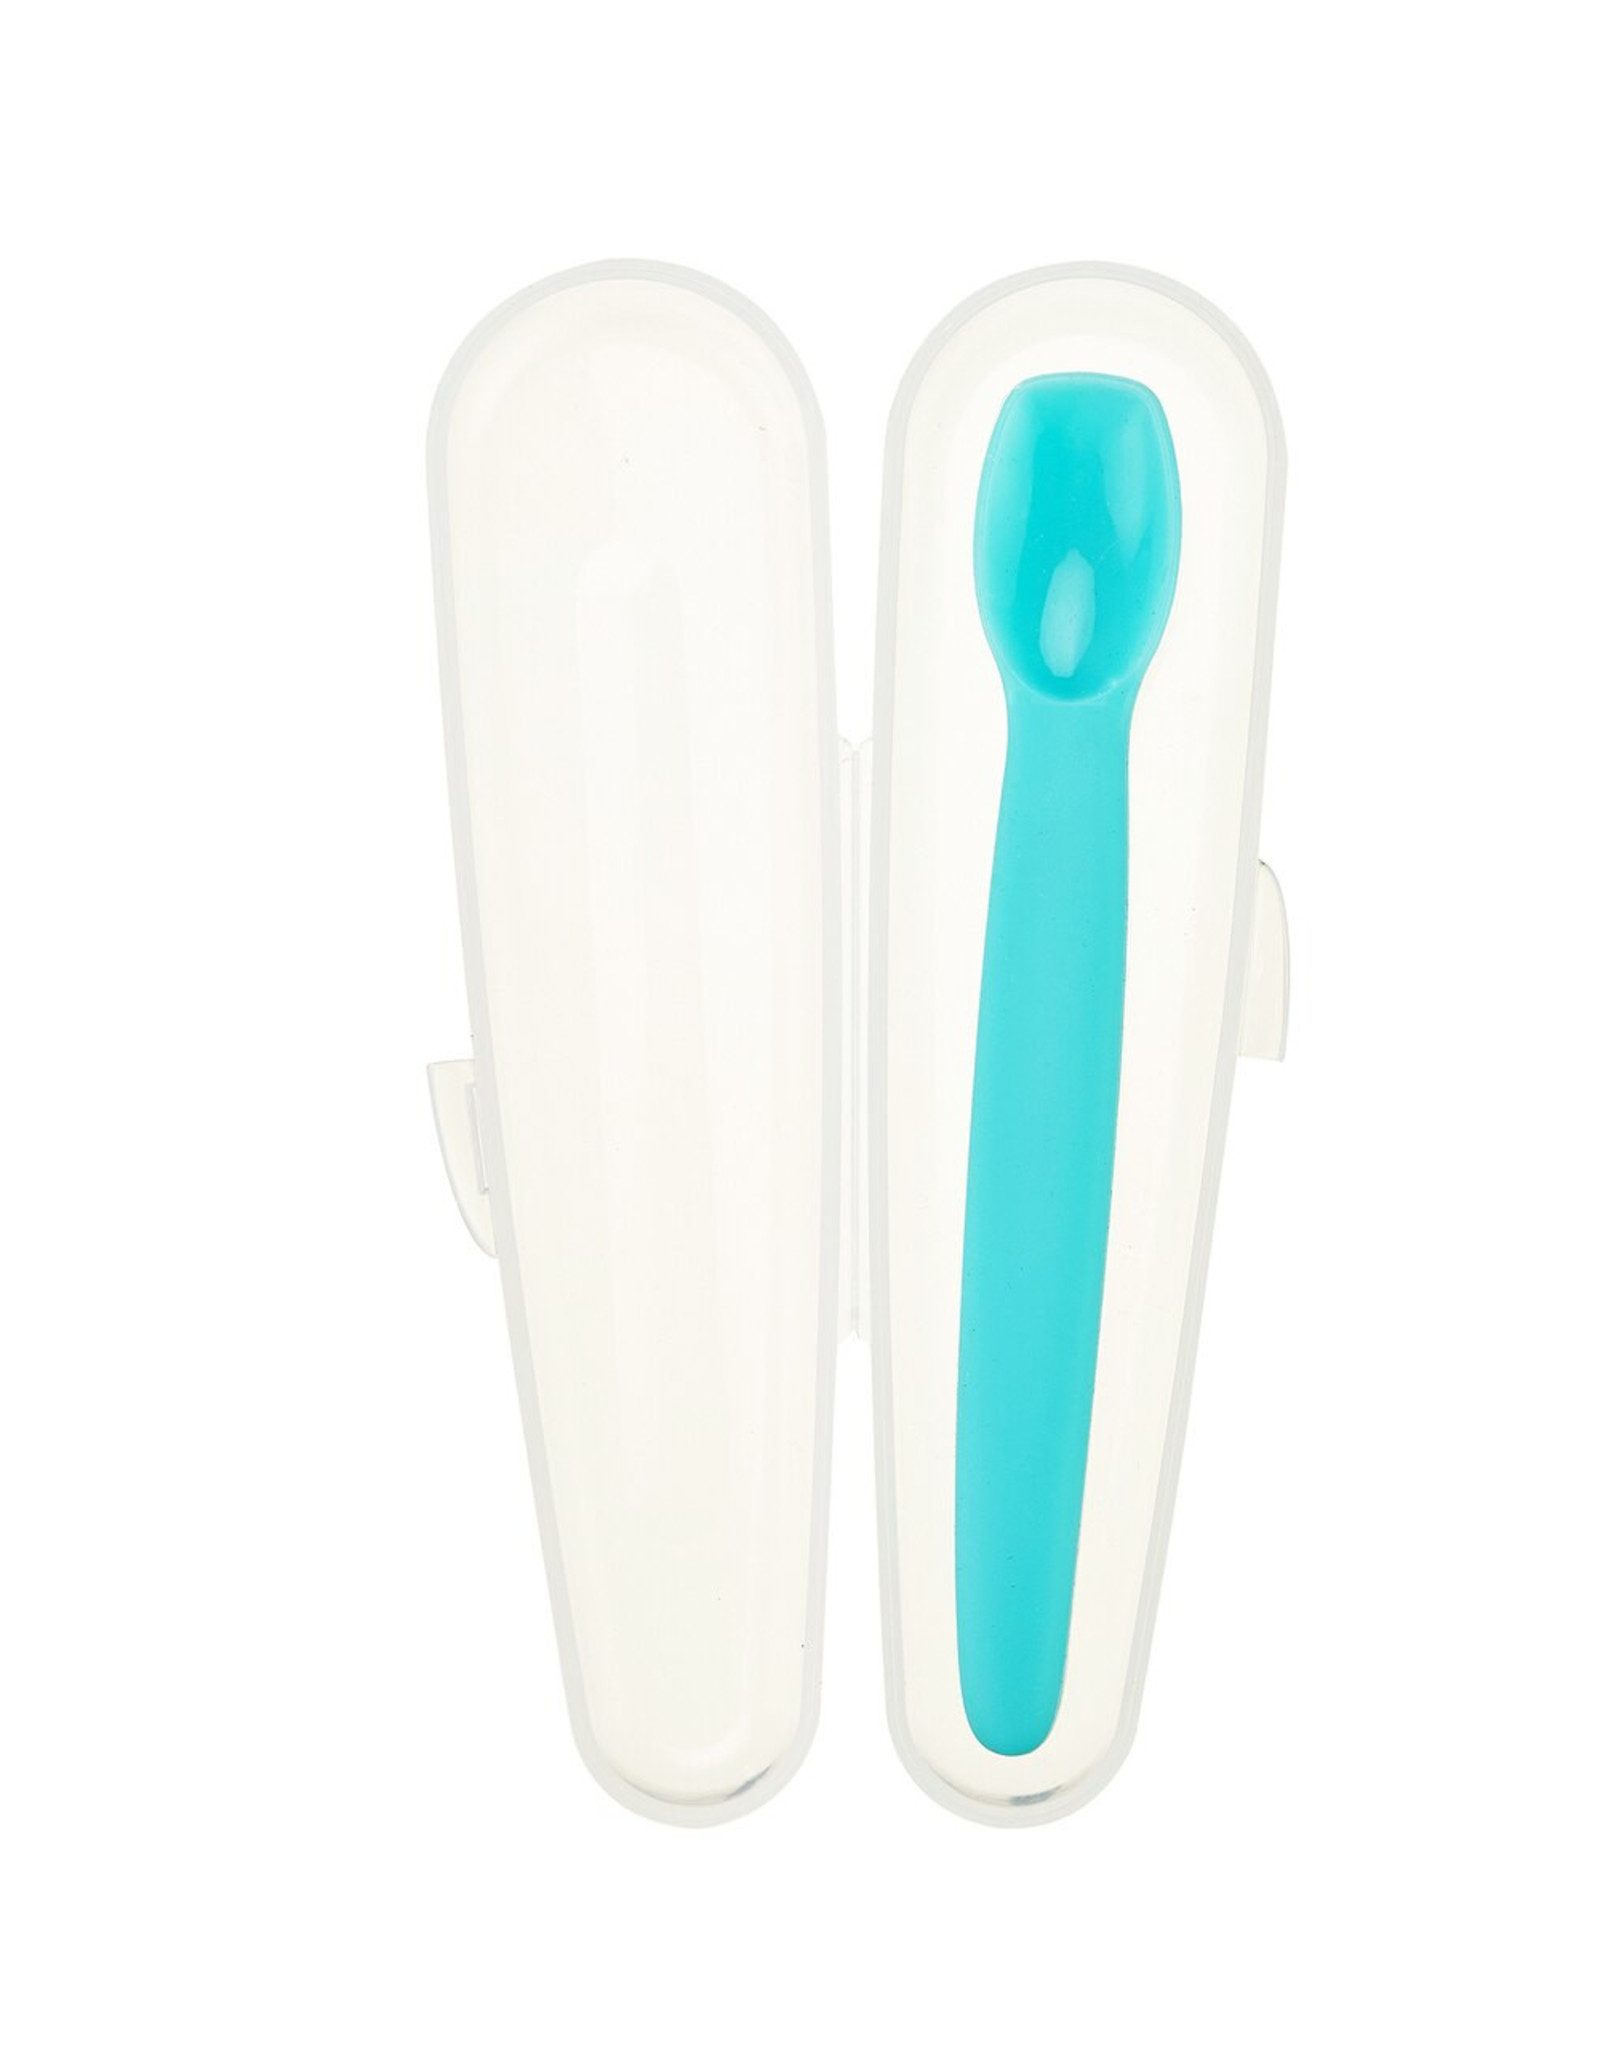 Inno Baby Silicone Baby Feeding Spoon w/ Carrying Case: Blue